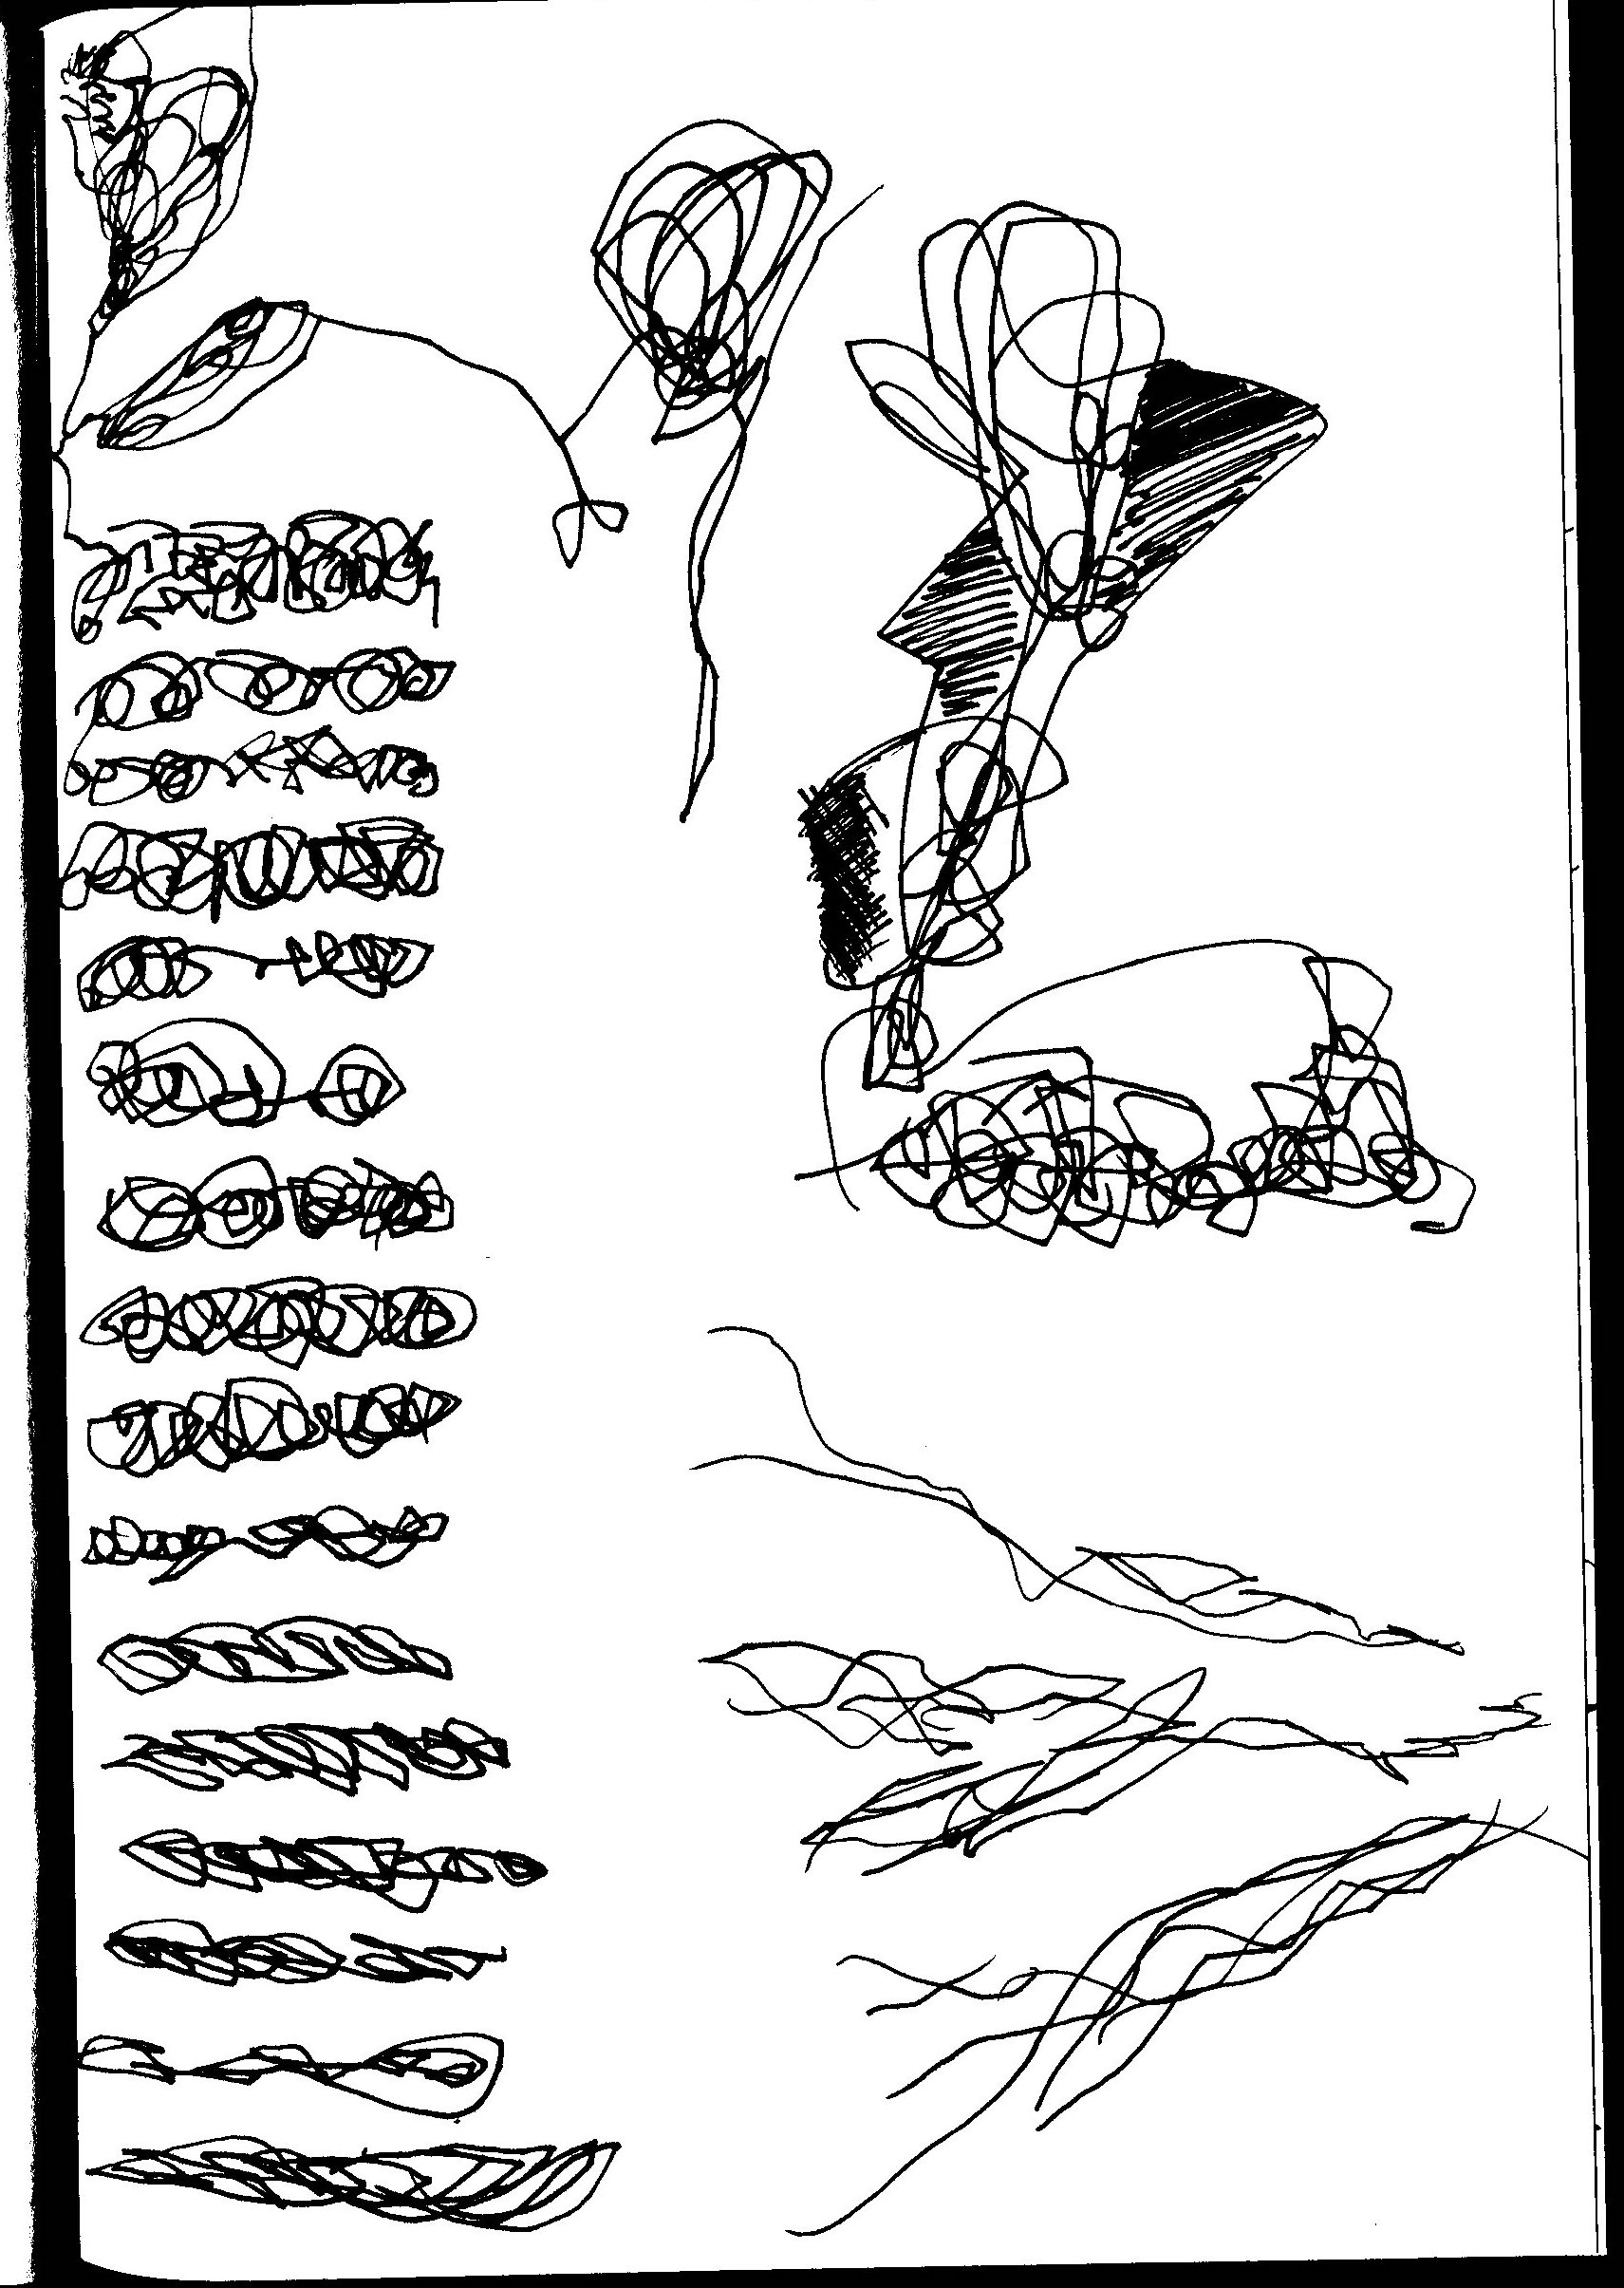 A drawing with black circular marks forming scribbles, shapes and contours; along one side the marks are stacked in a way that suggests writing.